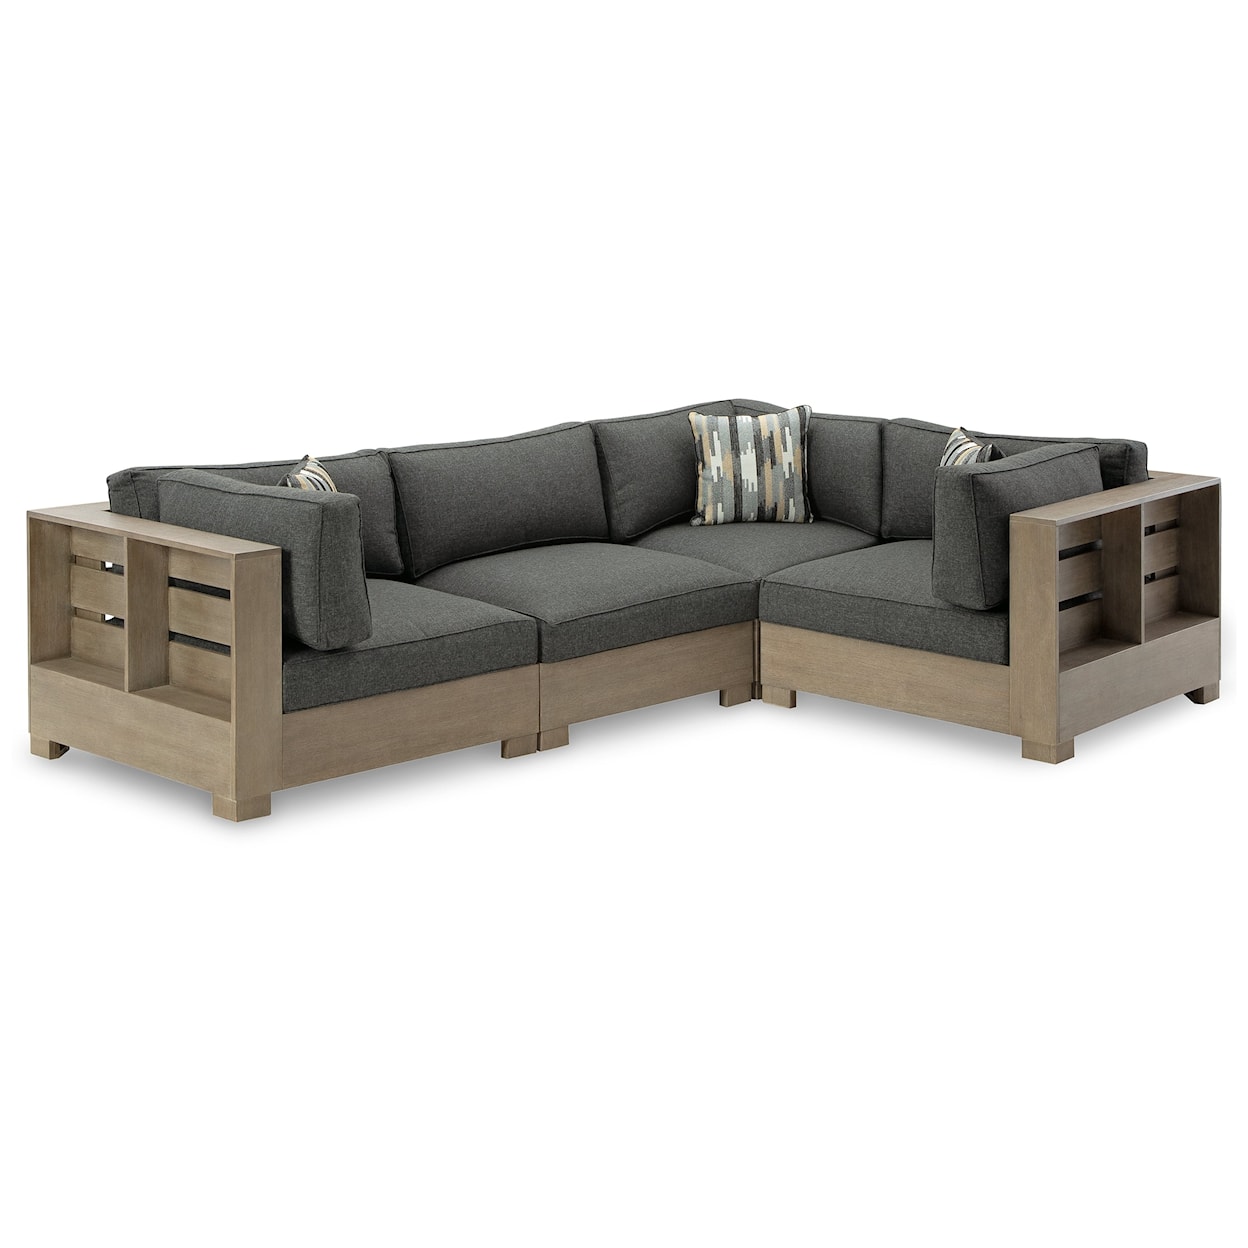 Signature Design by Ashley Citrine Park 4-Piece Outdoor Sectional